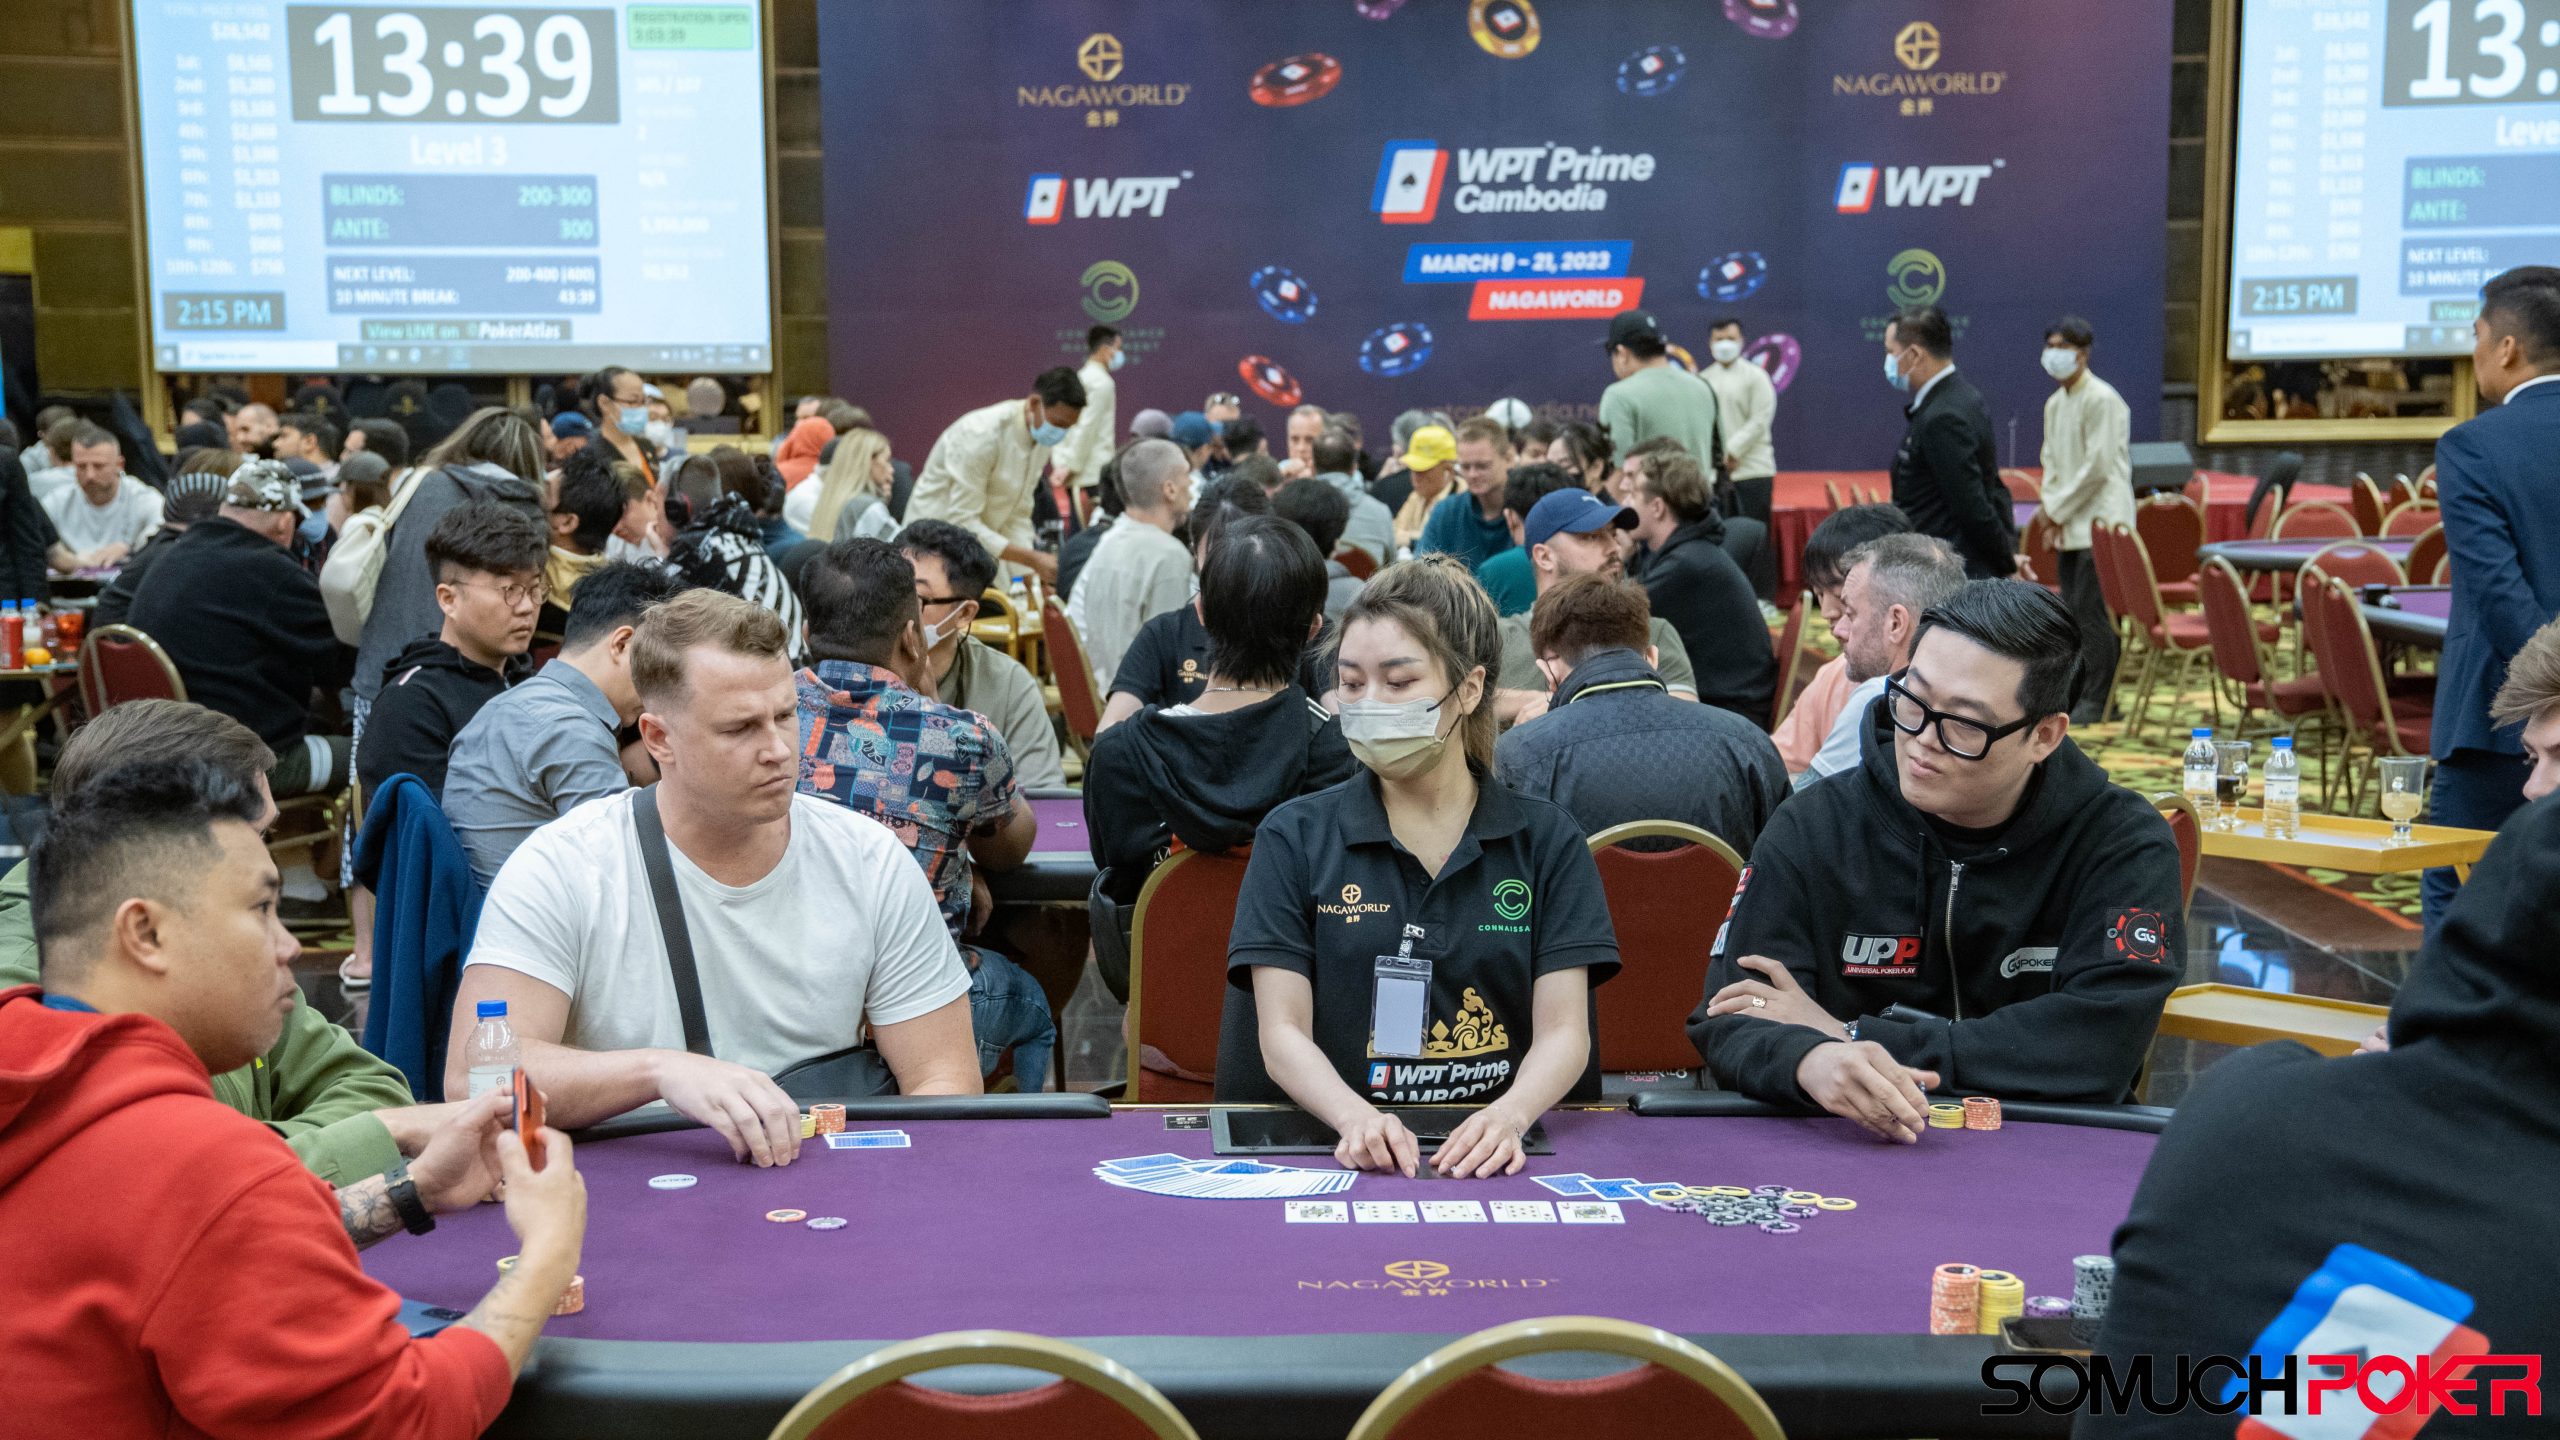 WPT Prime Cambodia off to a great start! 140+ entries and rising for opening event; first ever NagaWorld Millions $150K gtd starts at 530pm